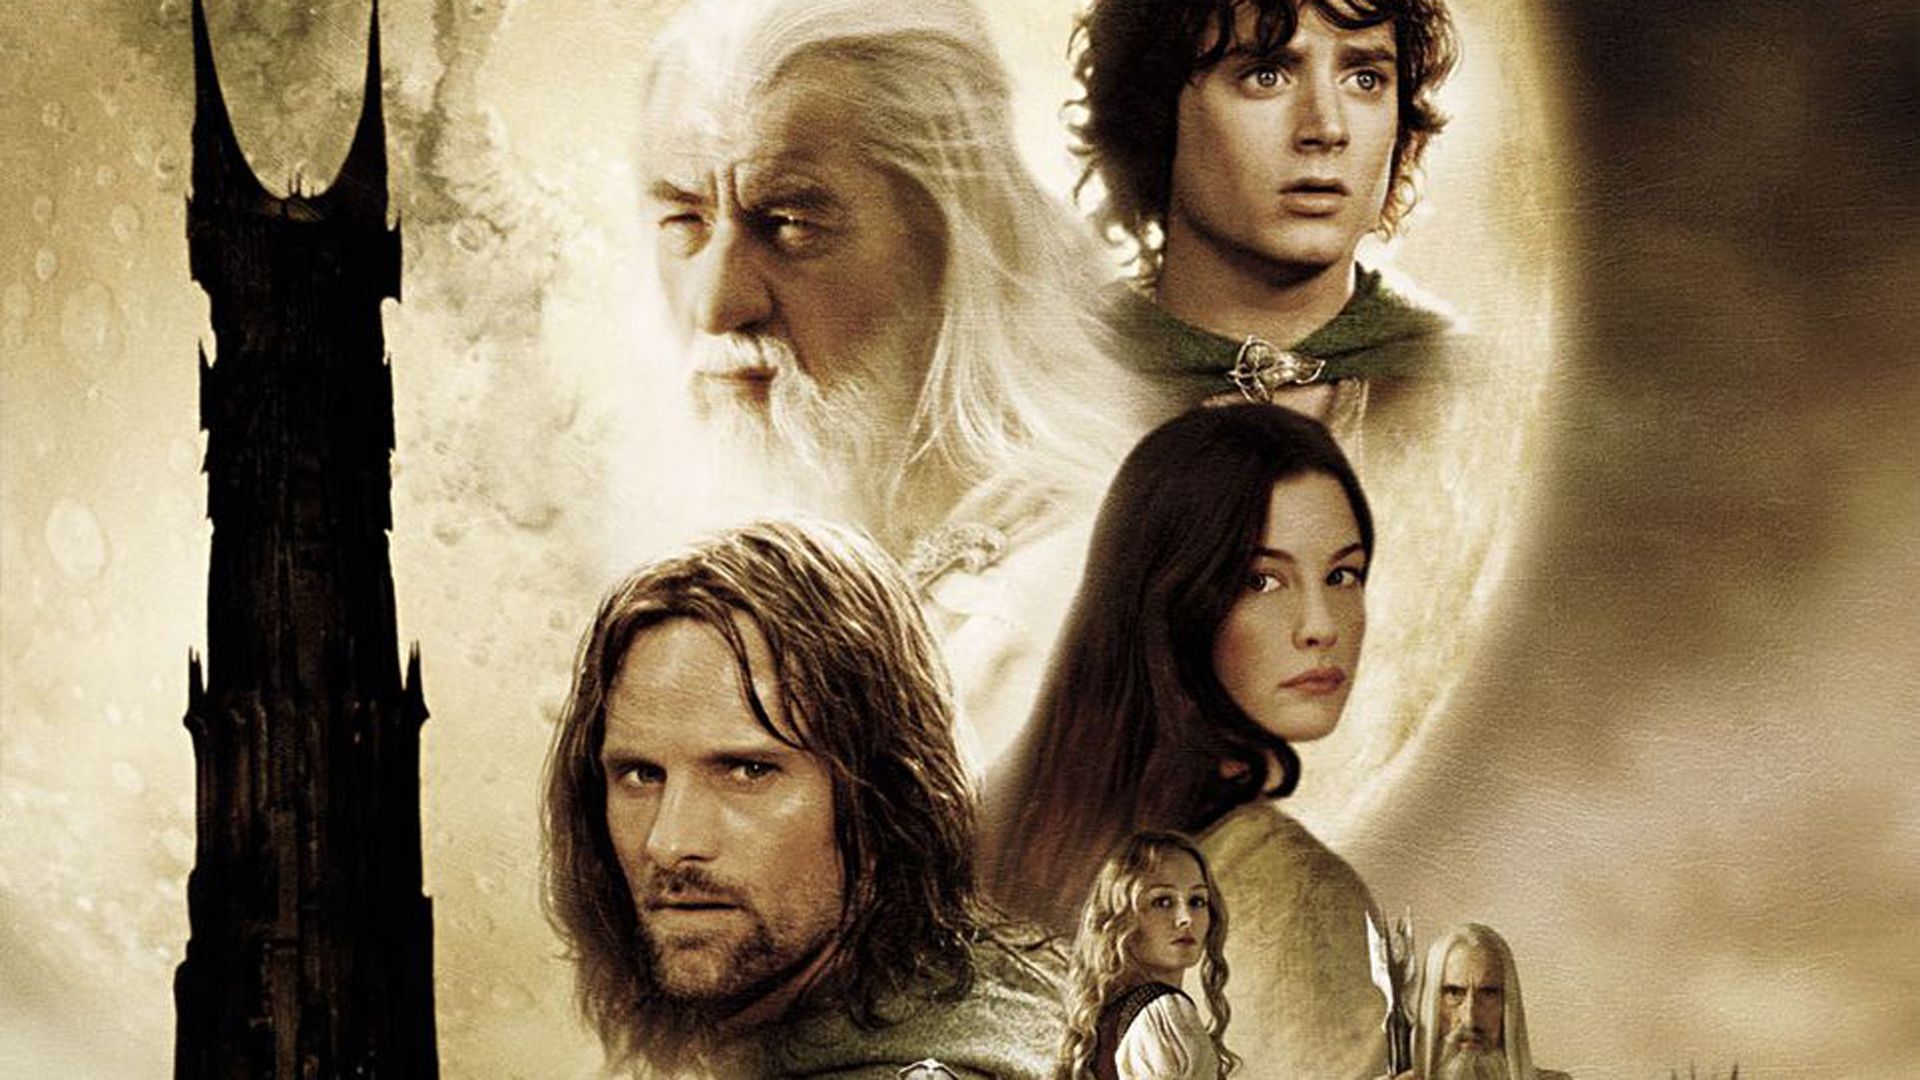 movies, Gandalf, Liv Tyler, The Lord of the Rings, Aragorn, Viggo